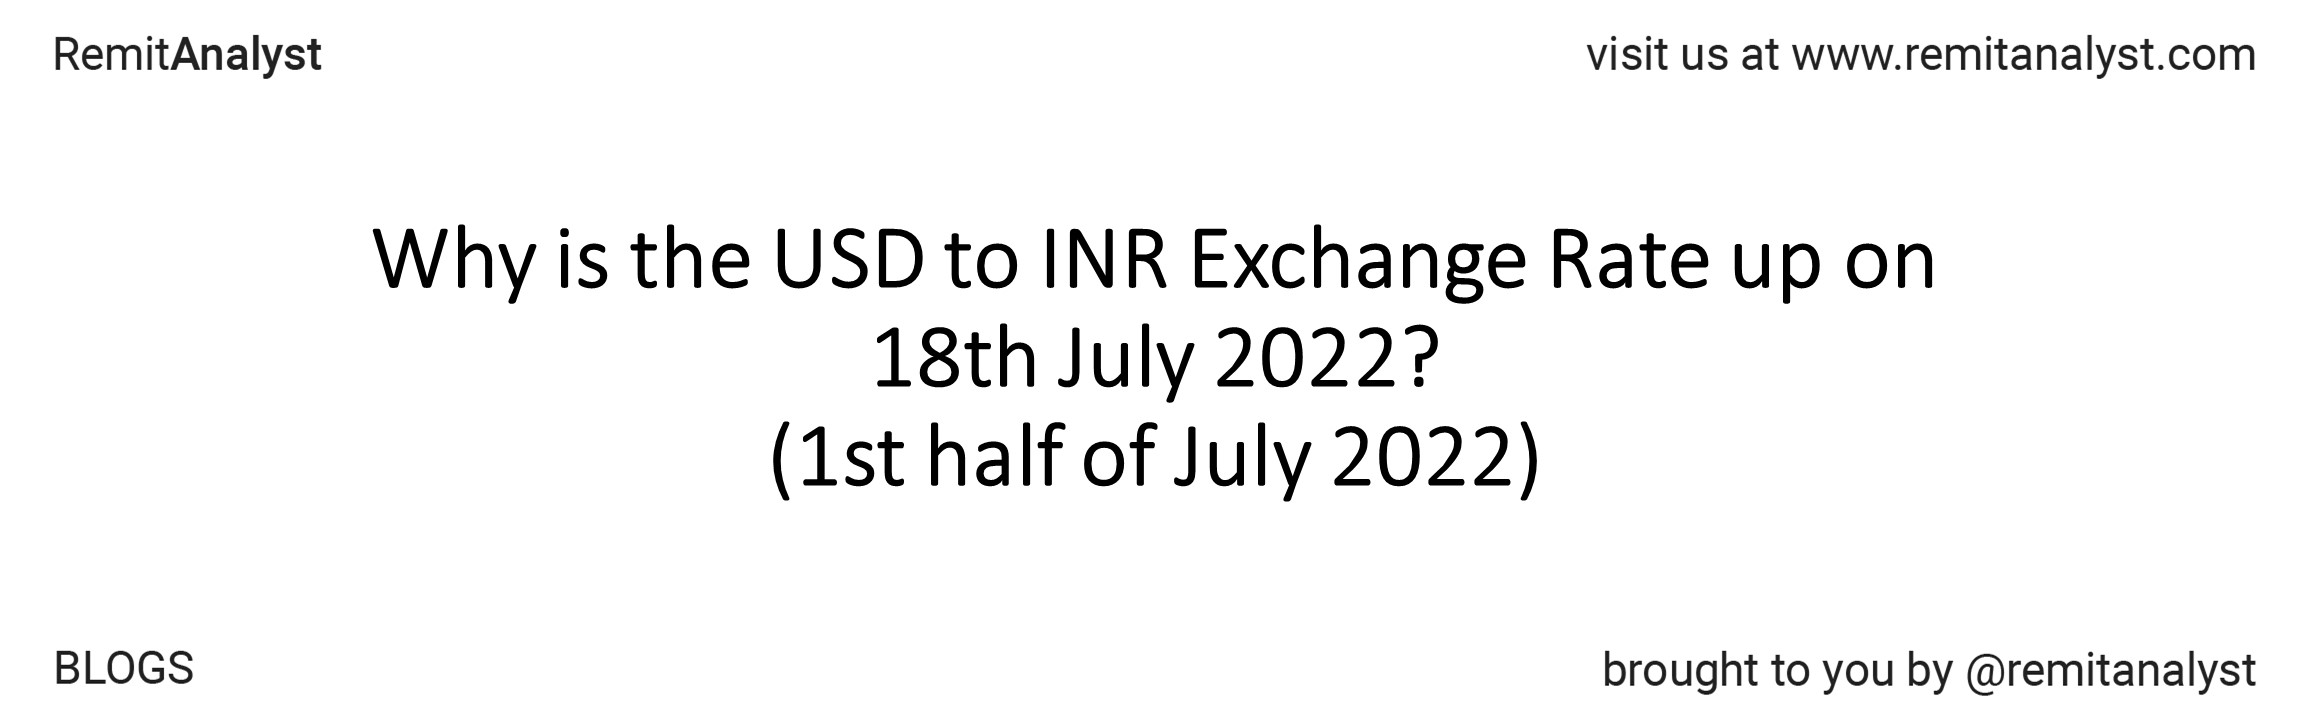 usd-to-inr-exchange-rate-4-July-2022-to-18-July-2022_title.jpg 